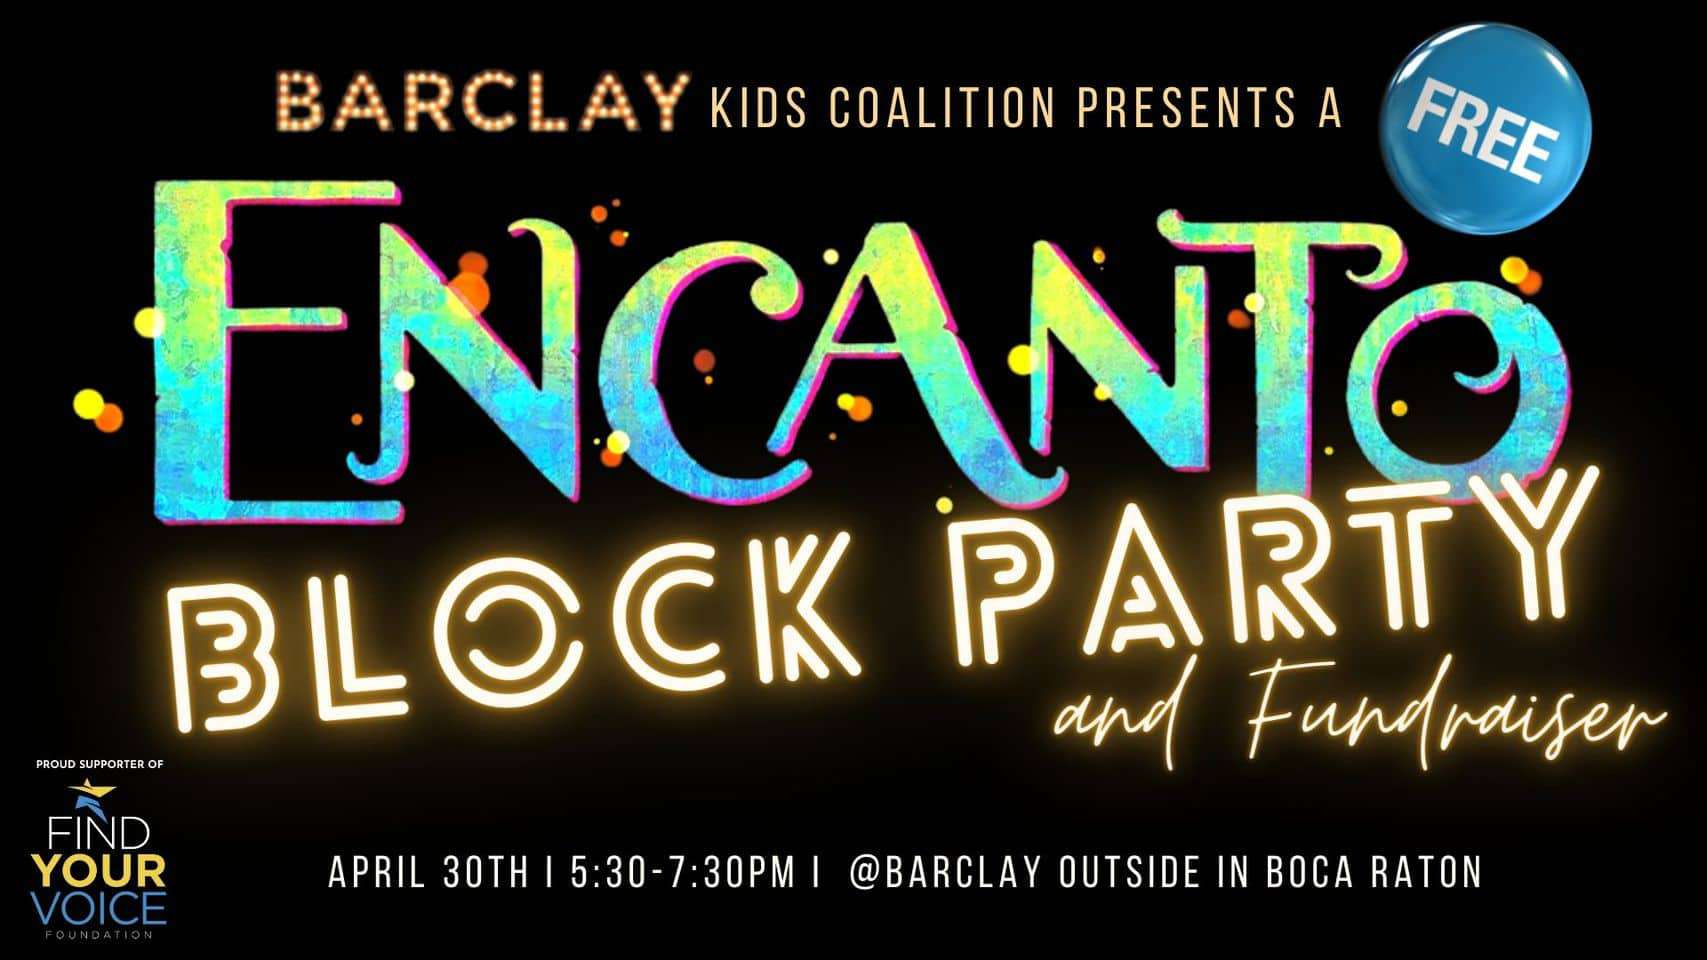 Barclay Performing Arts - Encanto Block Party and Fundraiser